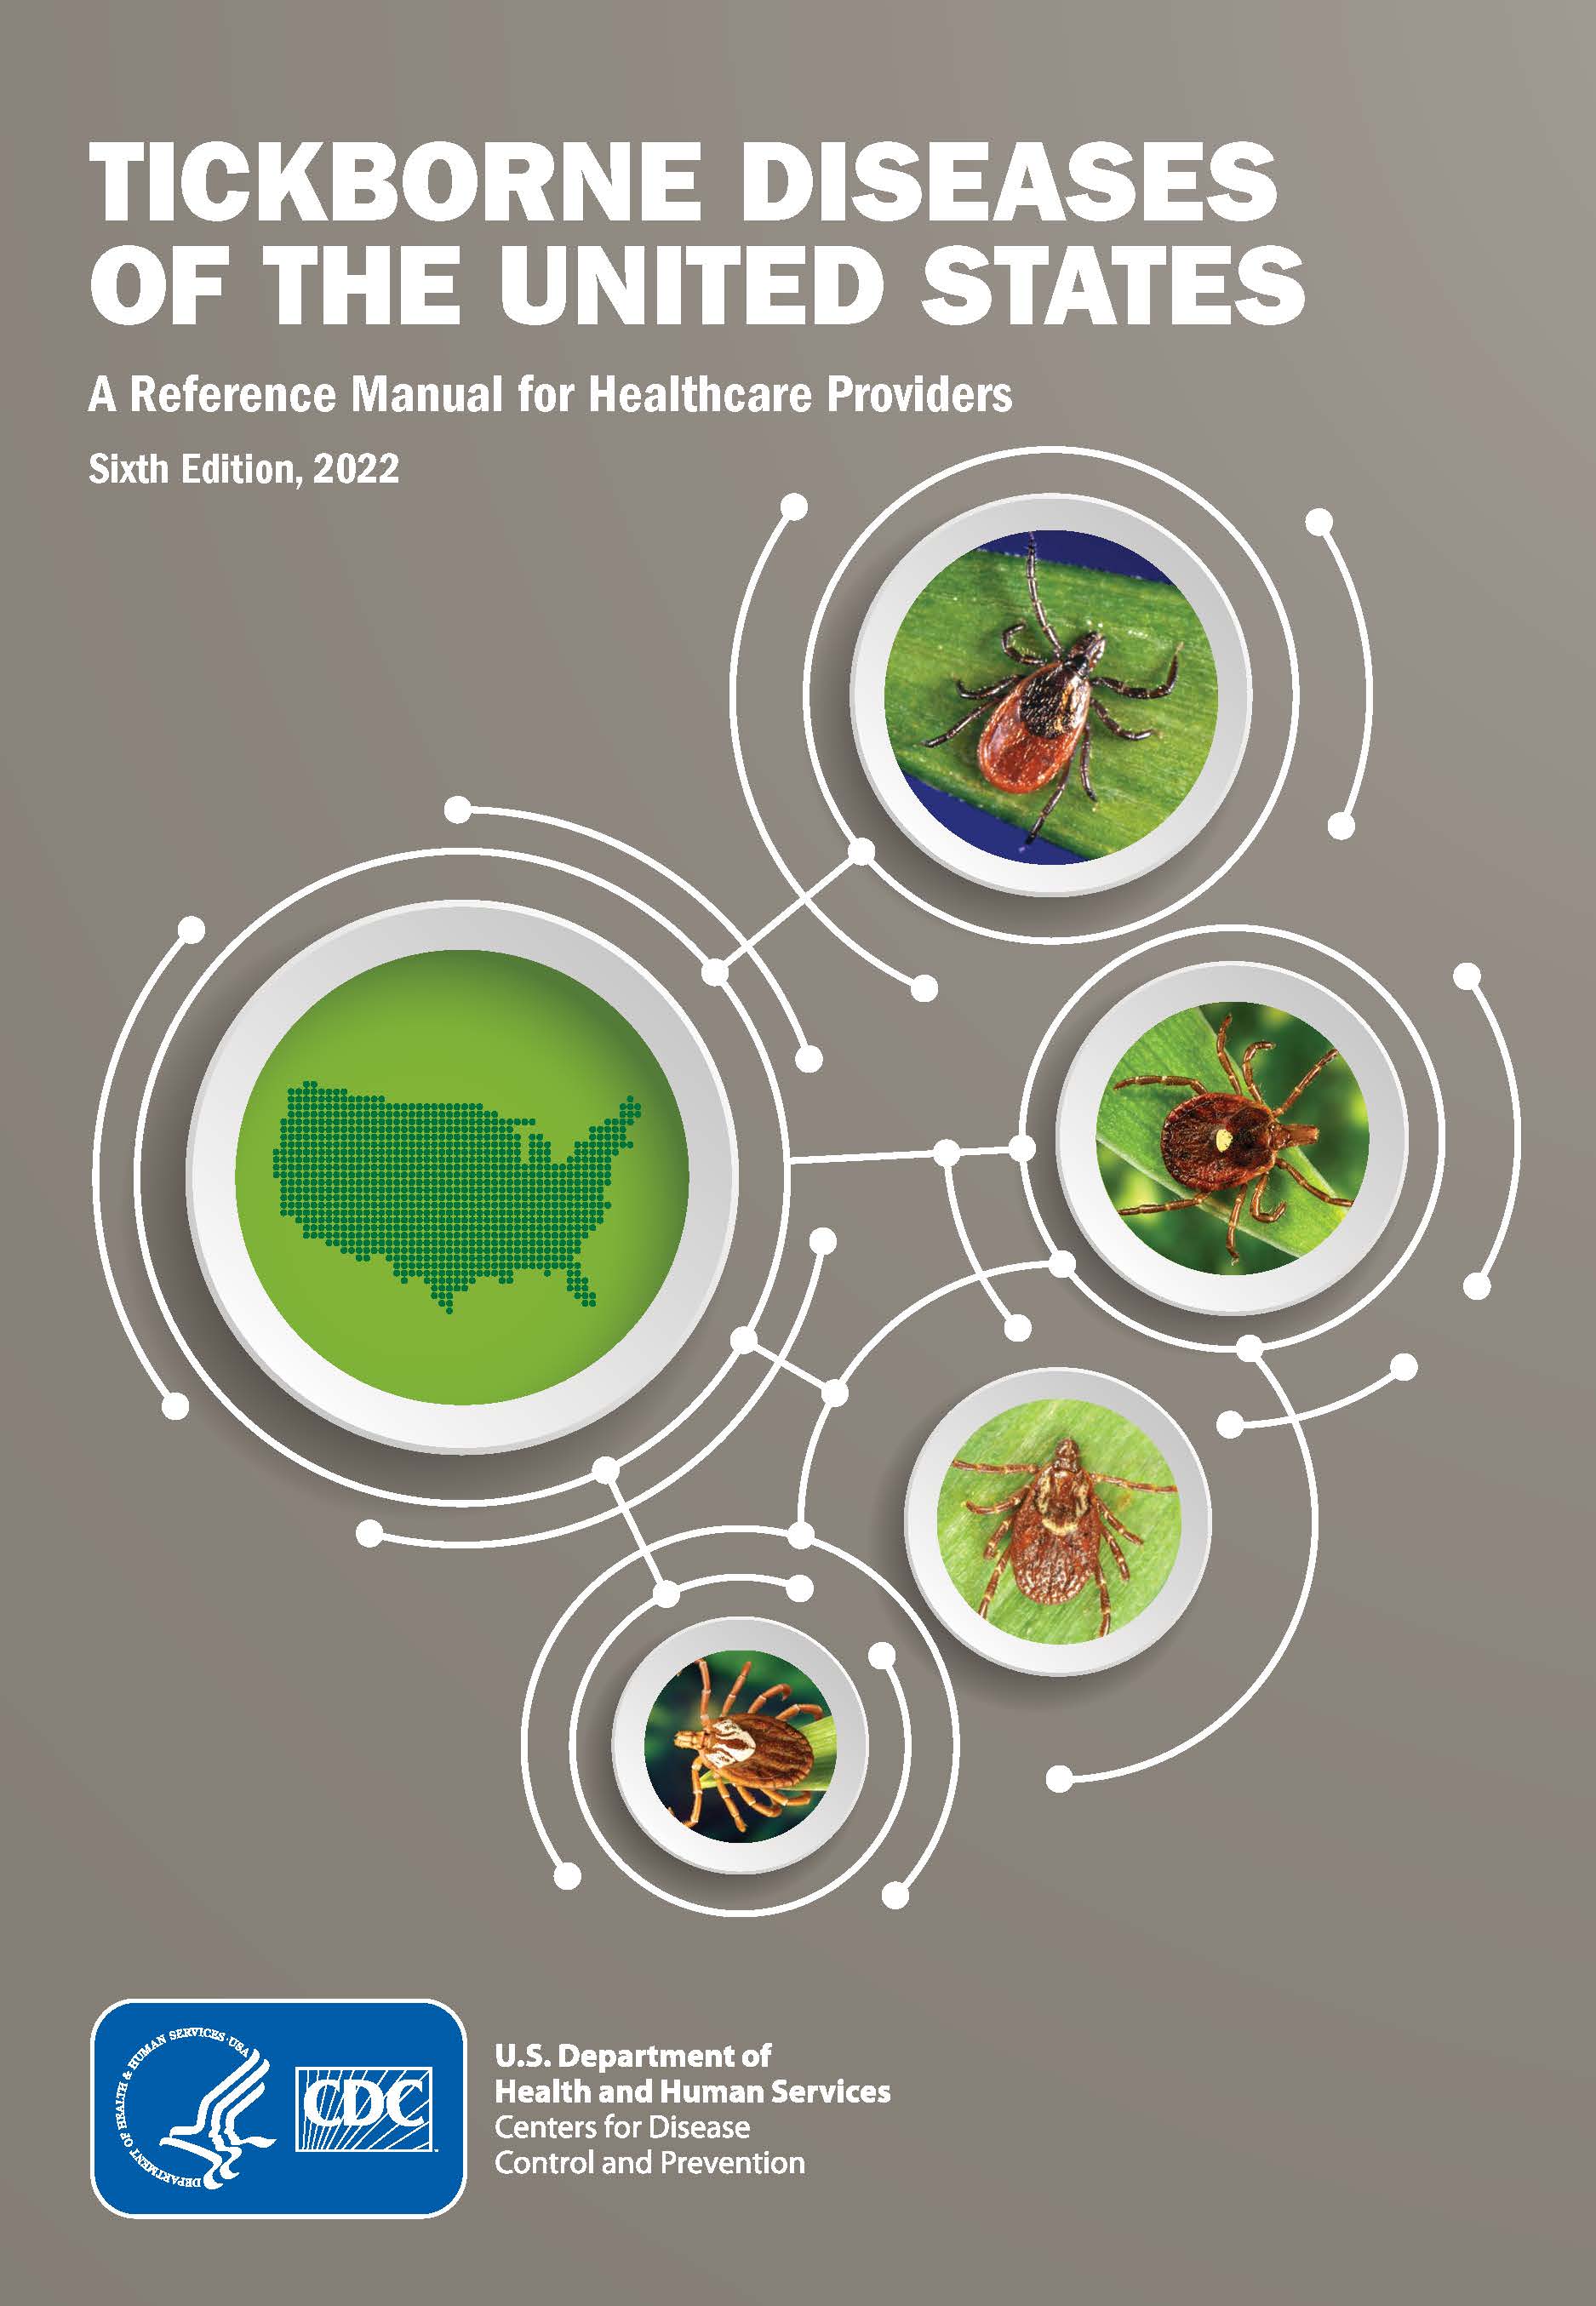 Cover image of Tickborne Diseases of the United States document, 6th Edition.